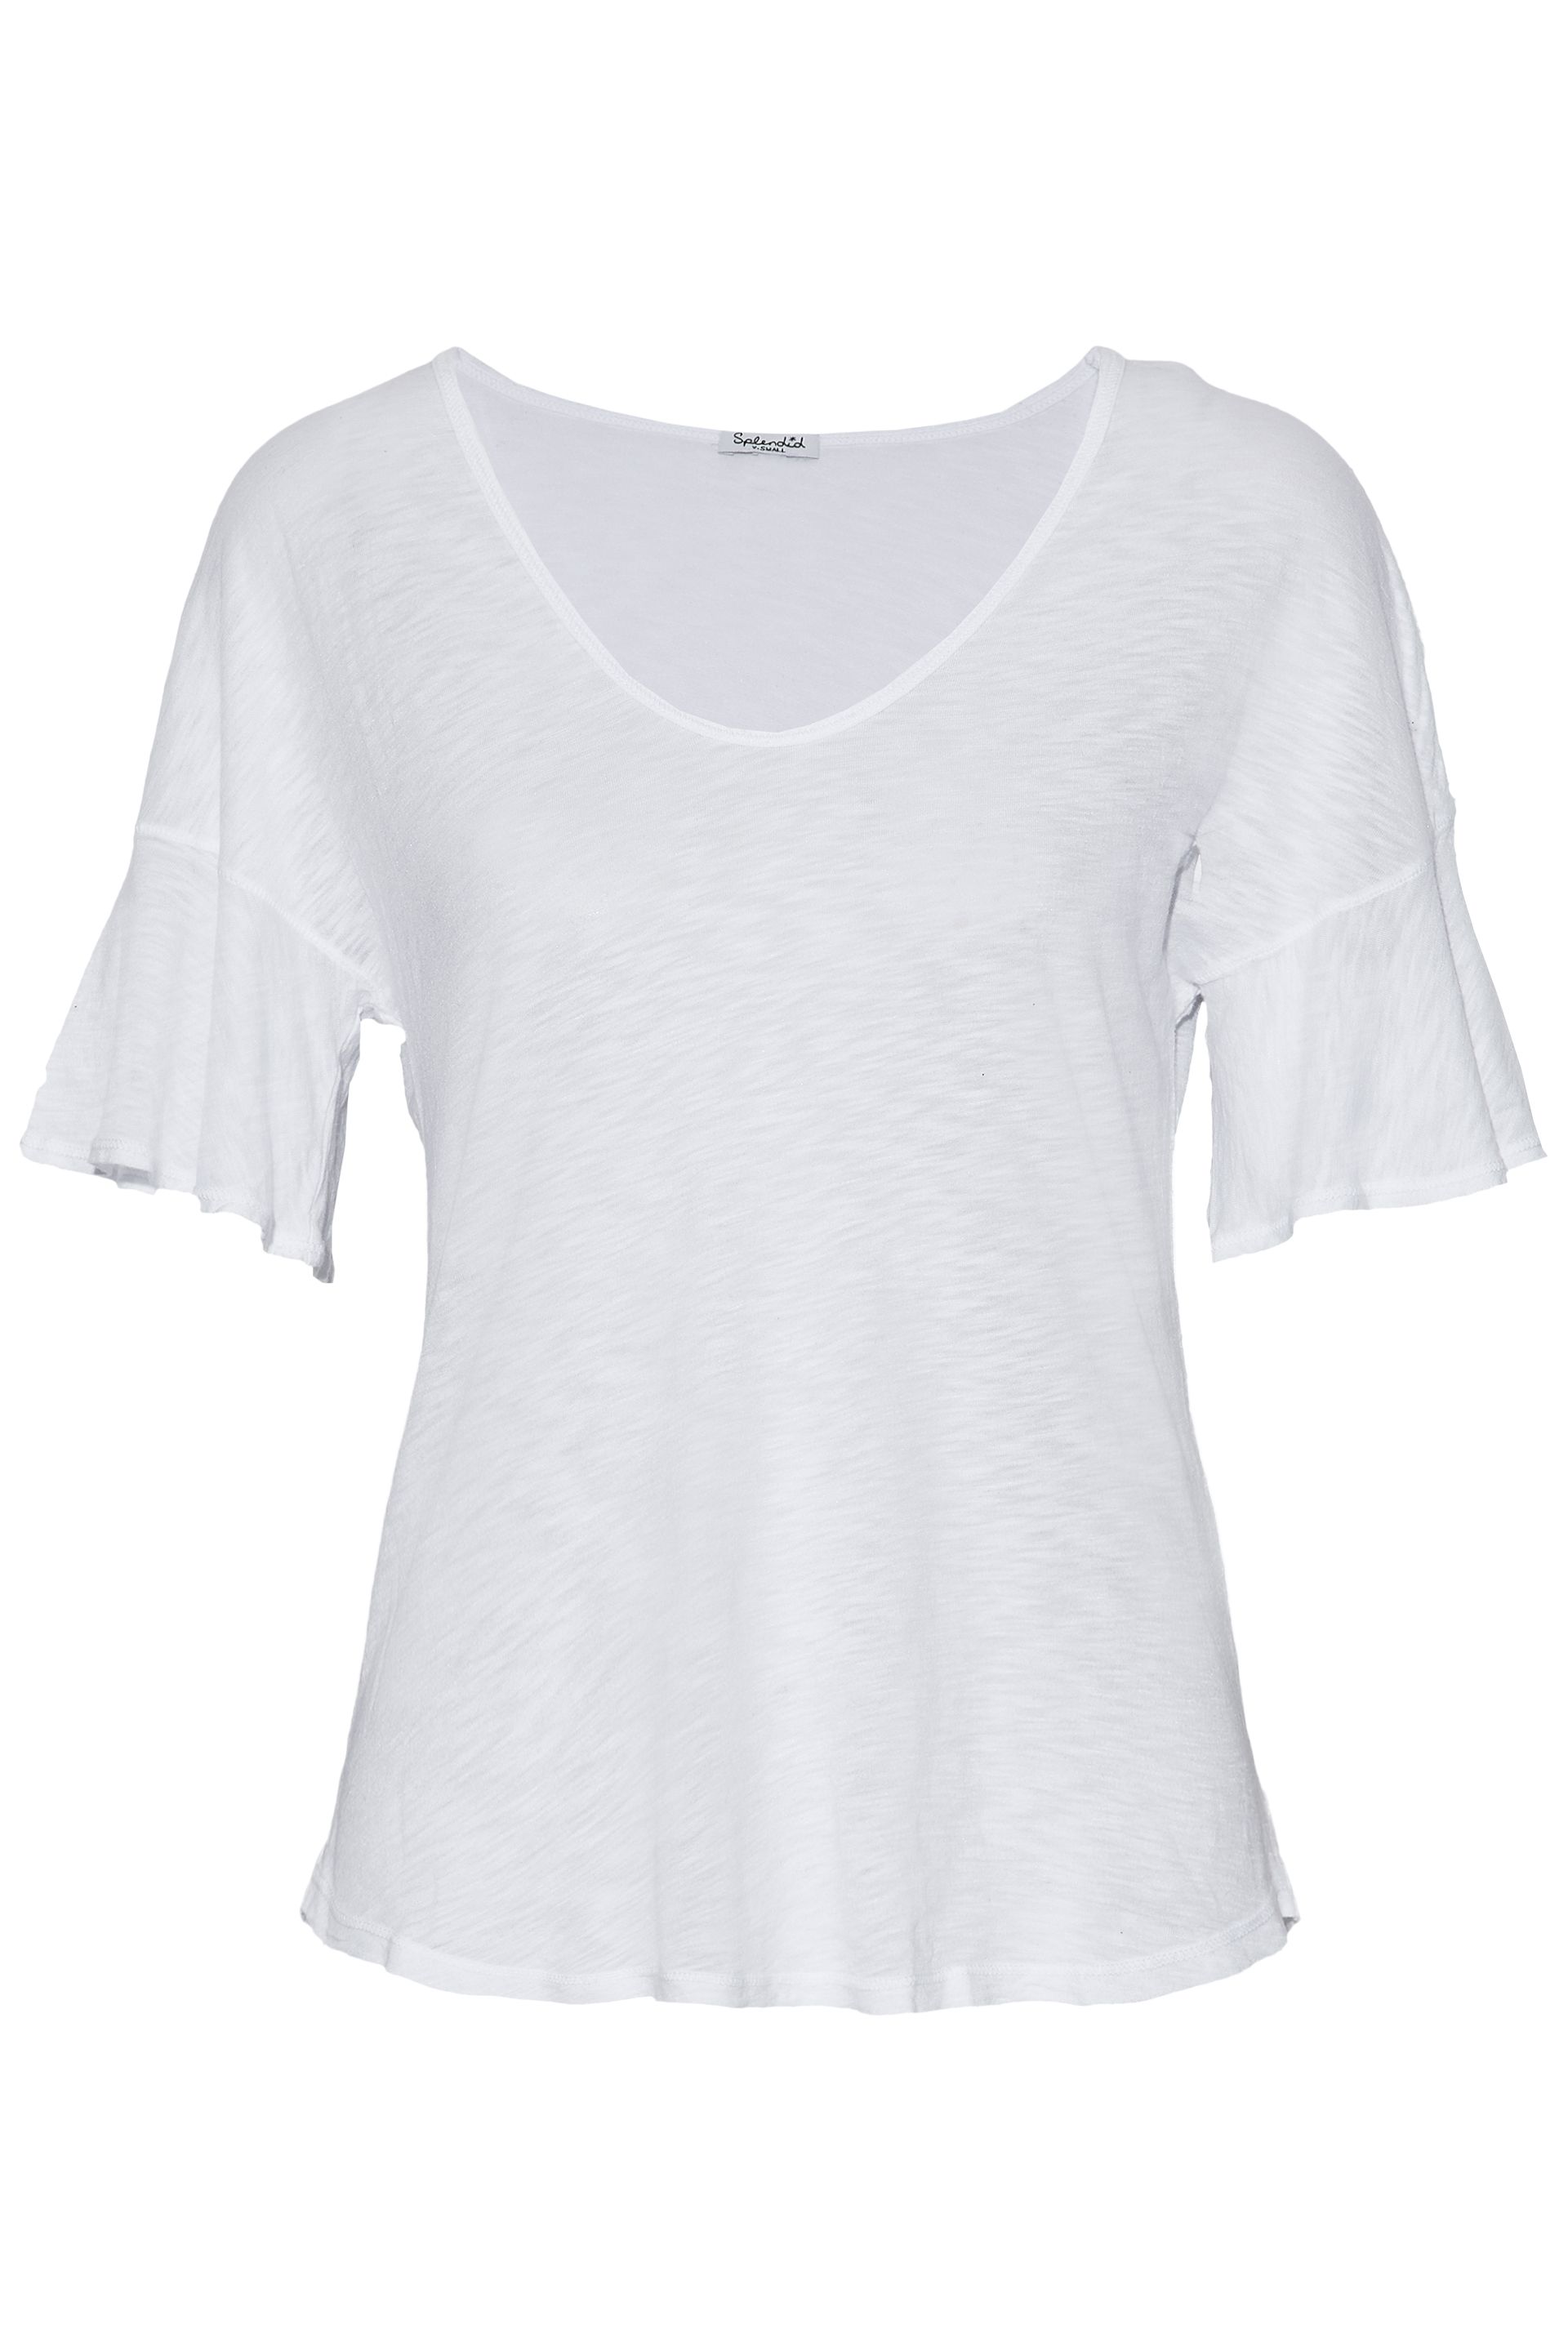 Designer Tops | Sale up to 70% off | THE OUTNET